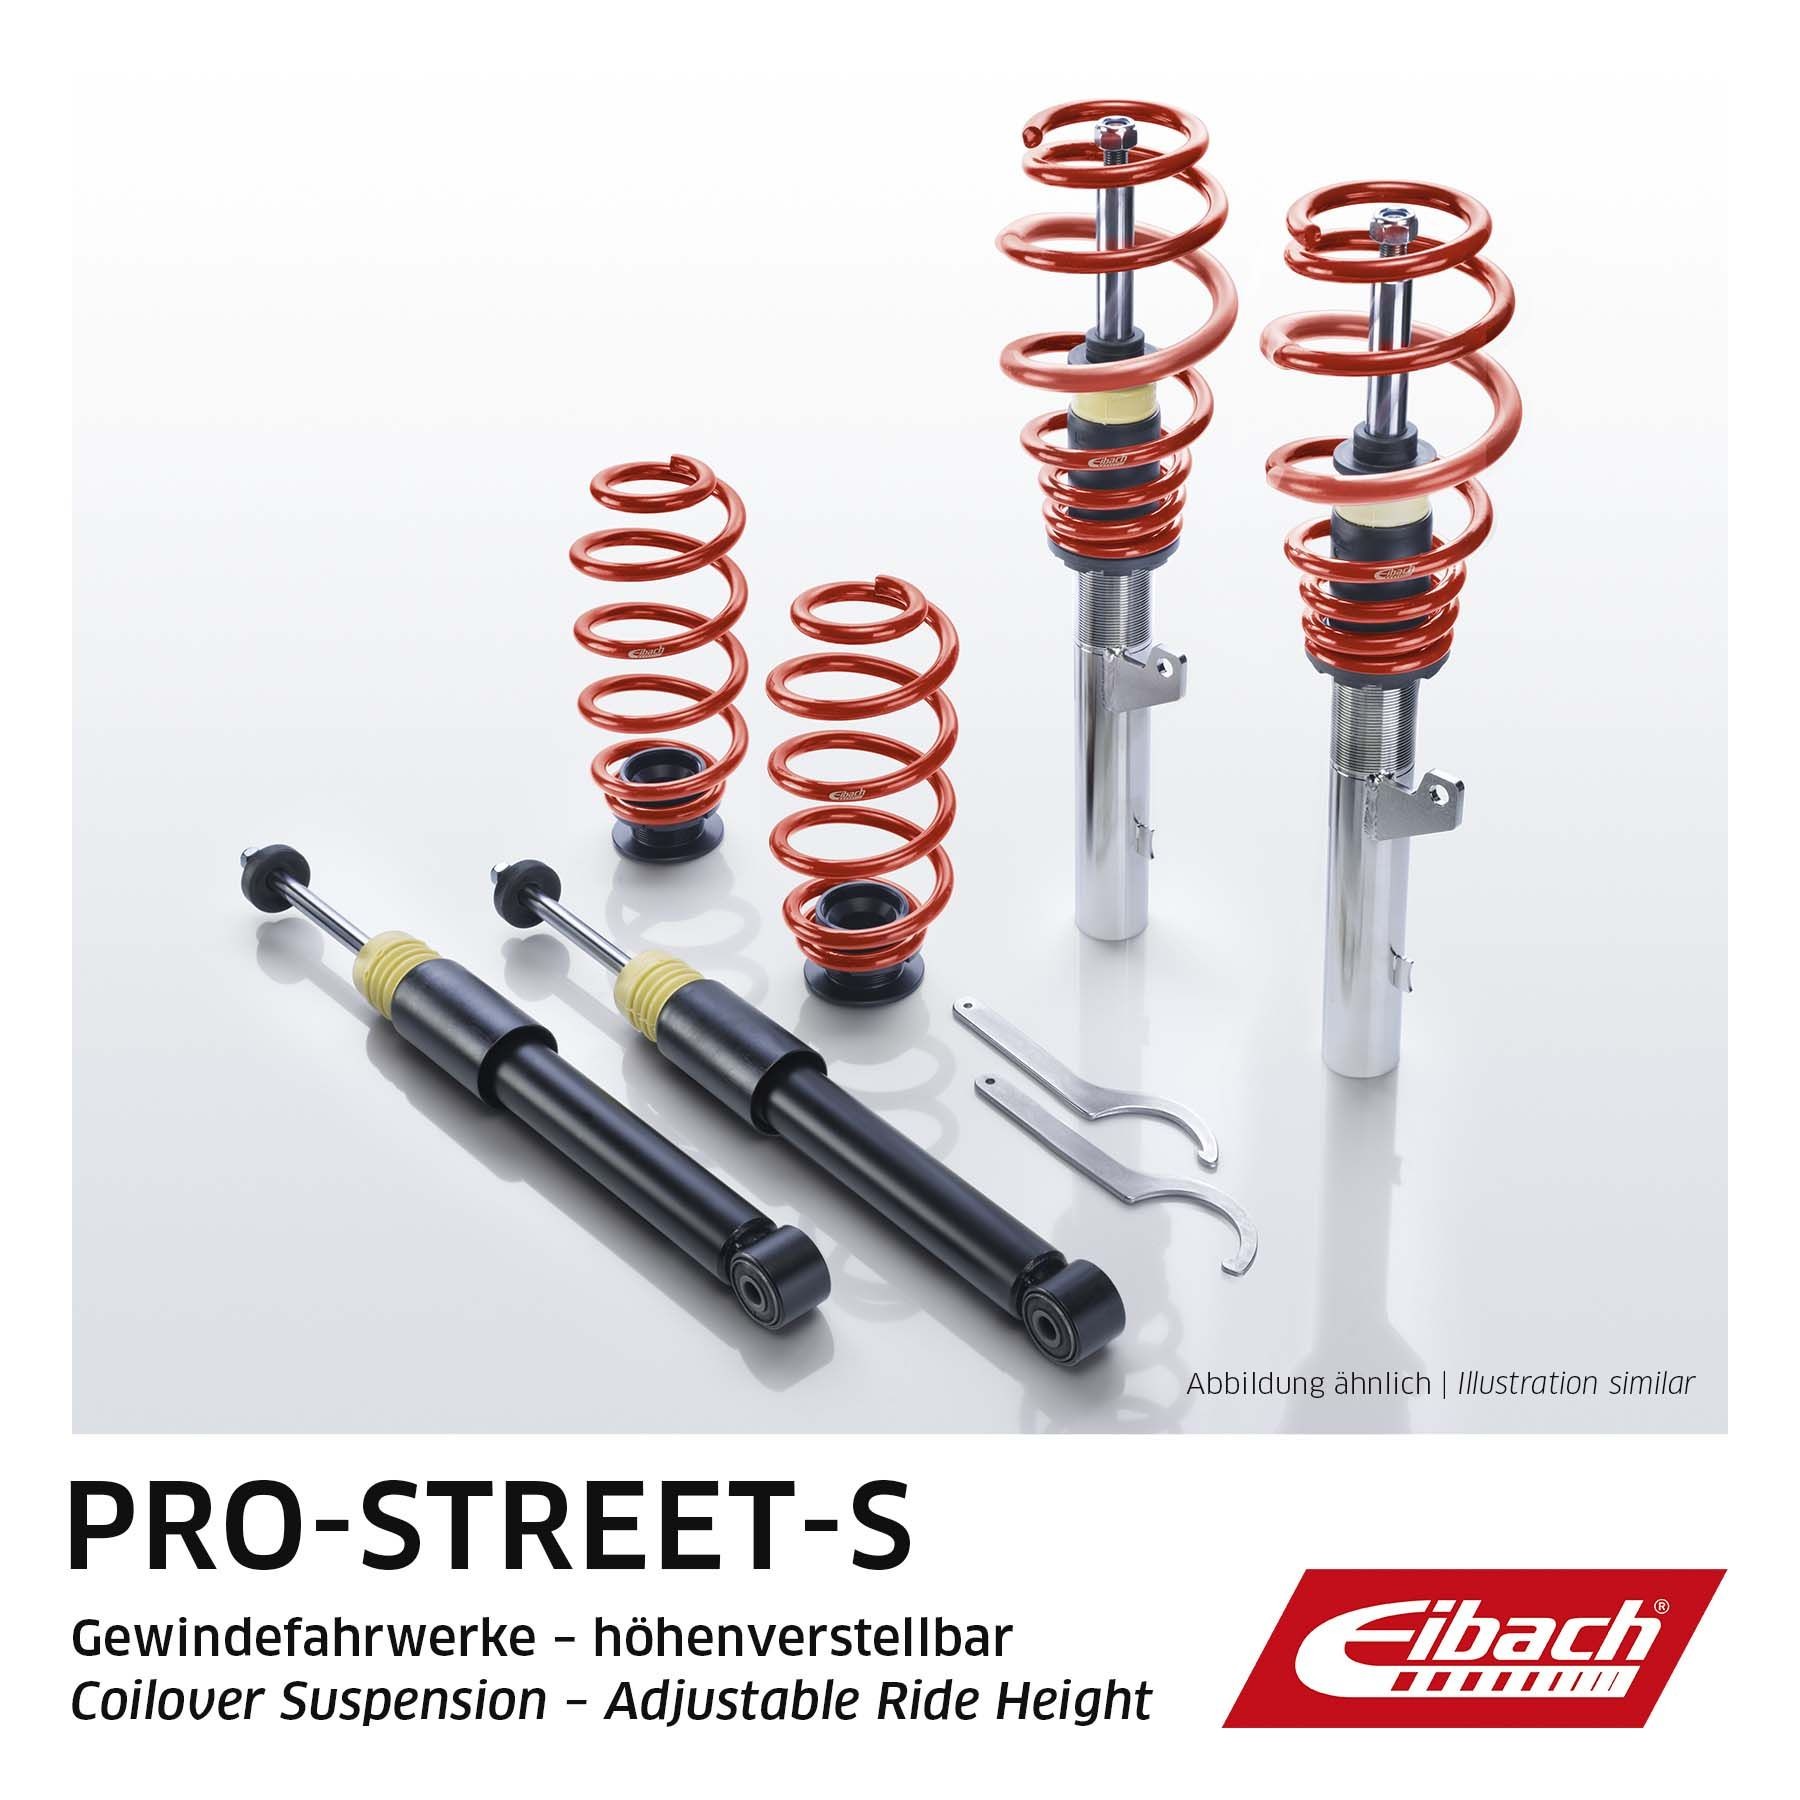 EIBACH Suspension kit, coil springs / shock absorbers VW Golf 4 (1J1) new PSS65-85-001-01-22